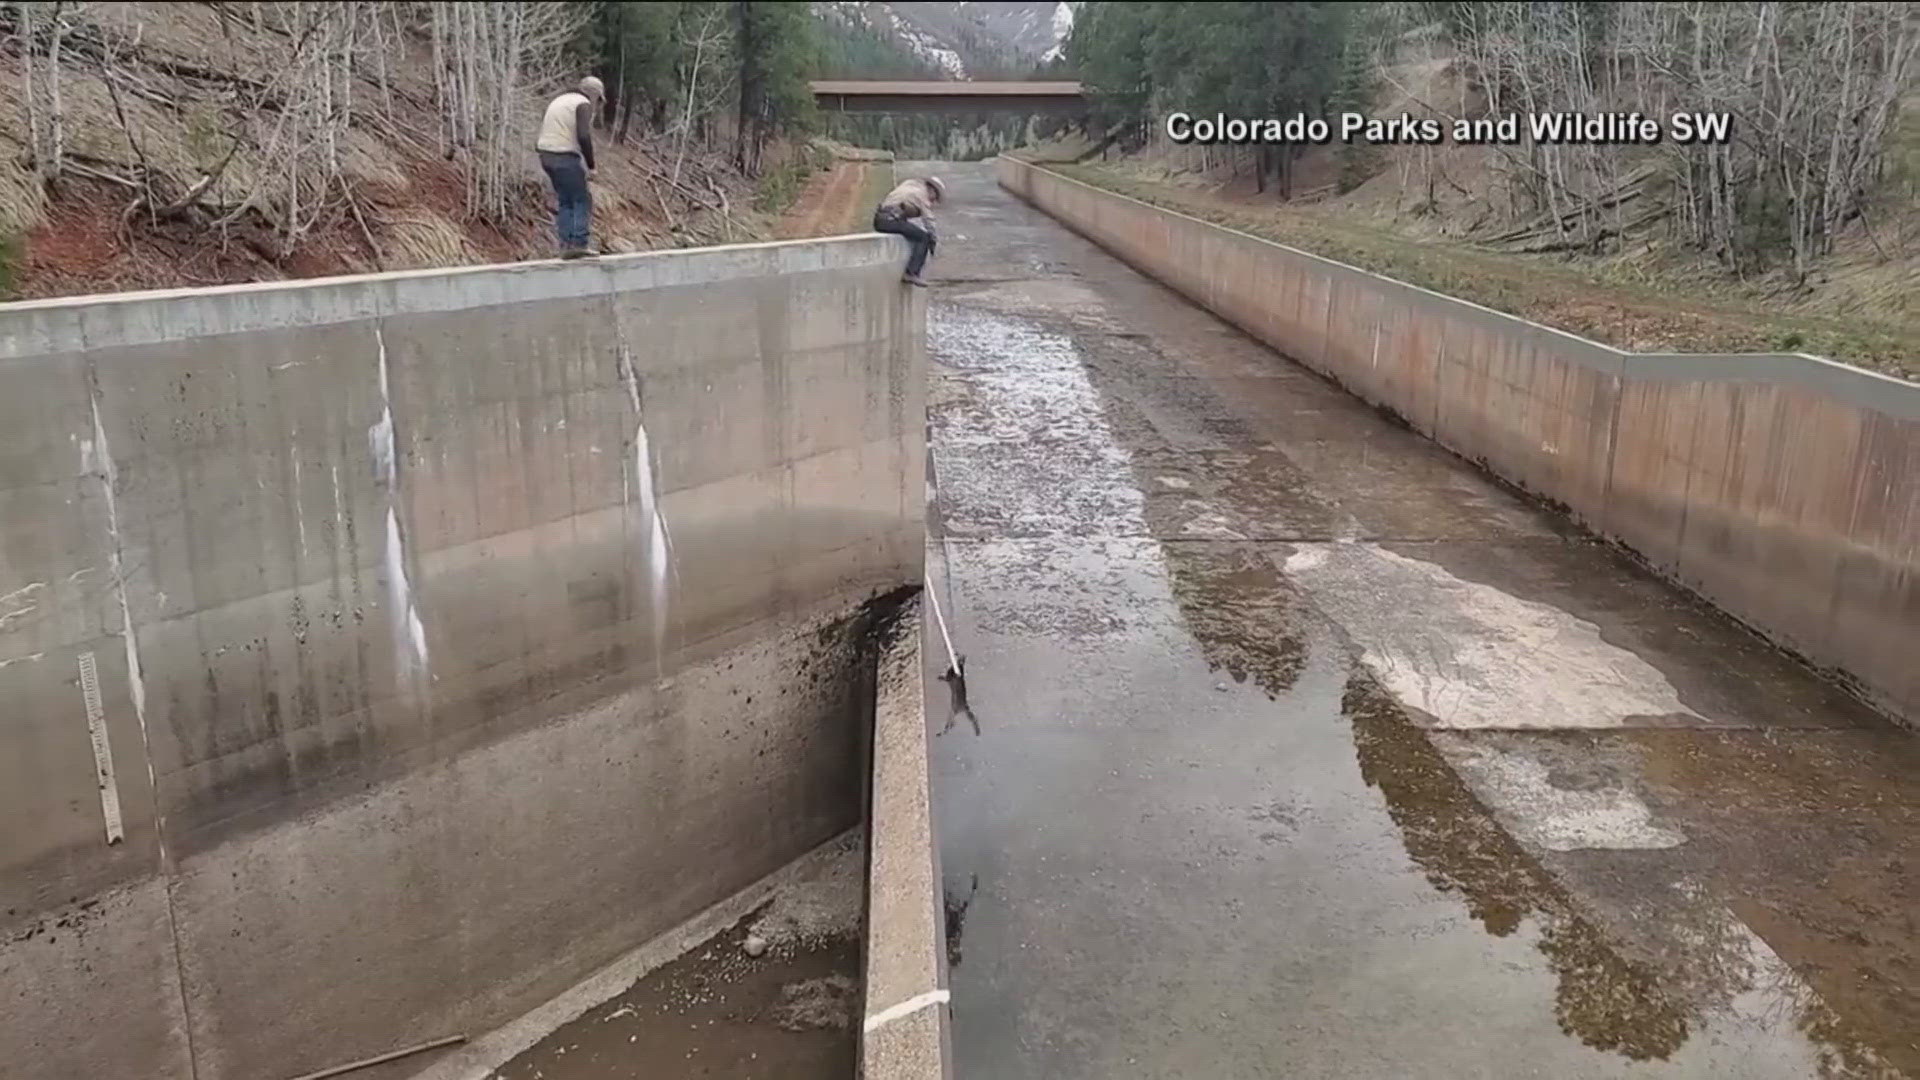 Colorado wildlife officials were called to Vallecito Reservoir by a staffer who was about to release water down the spillway where the two young cubs were stuck.